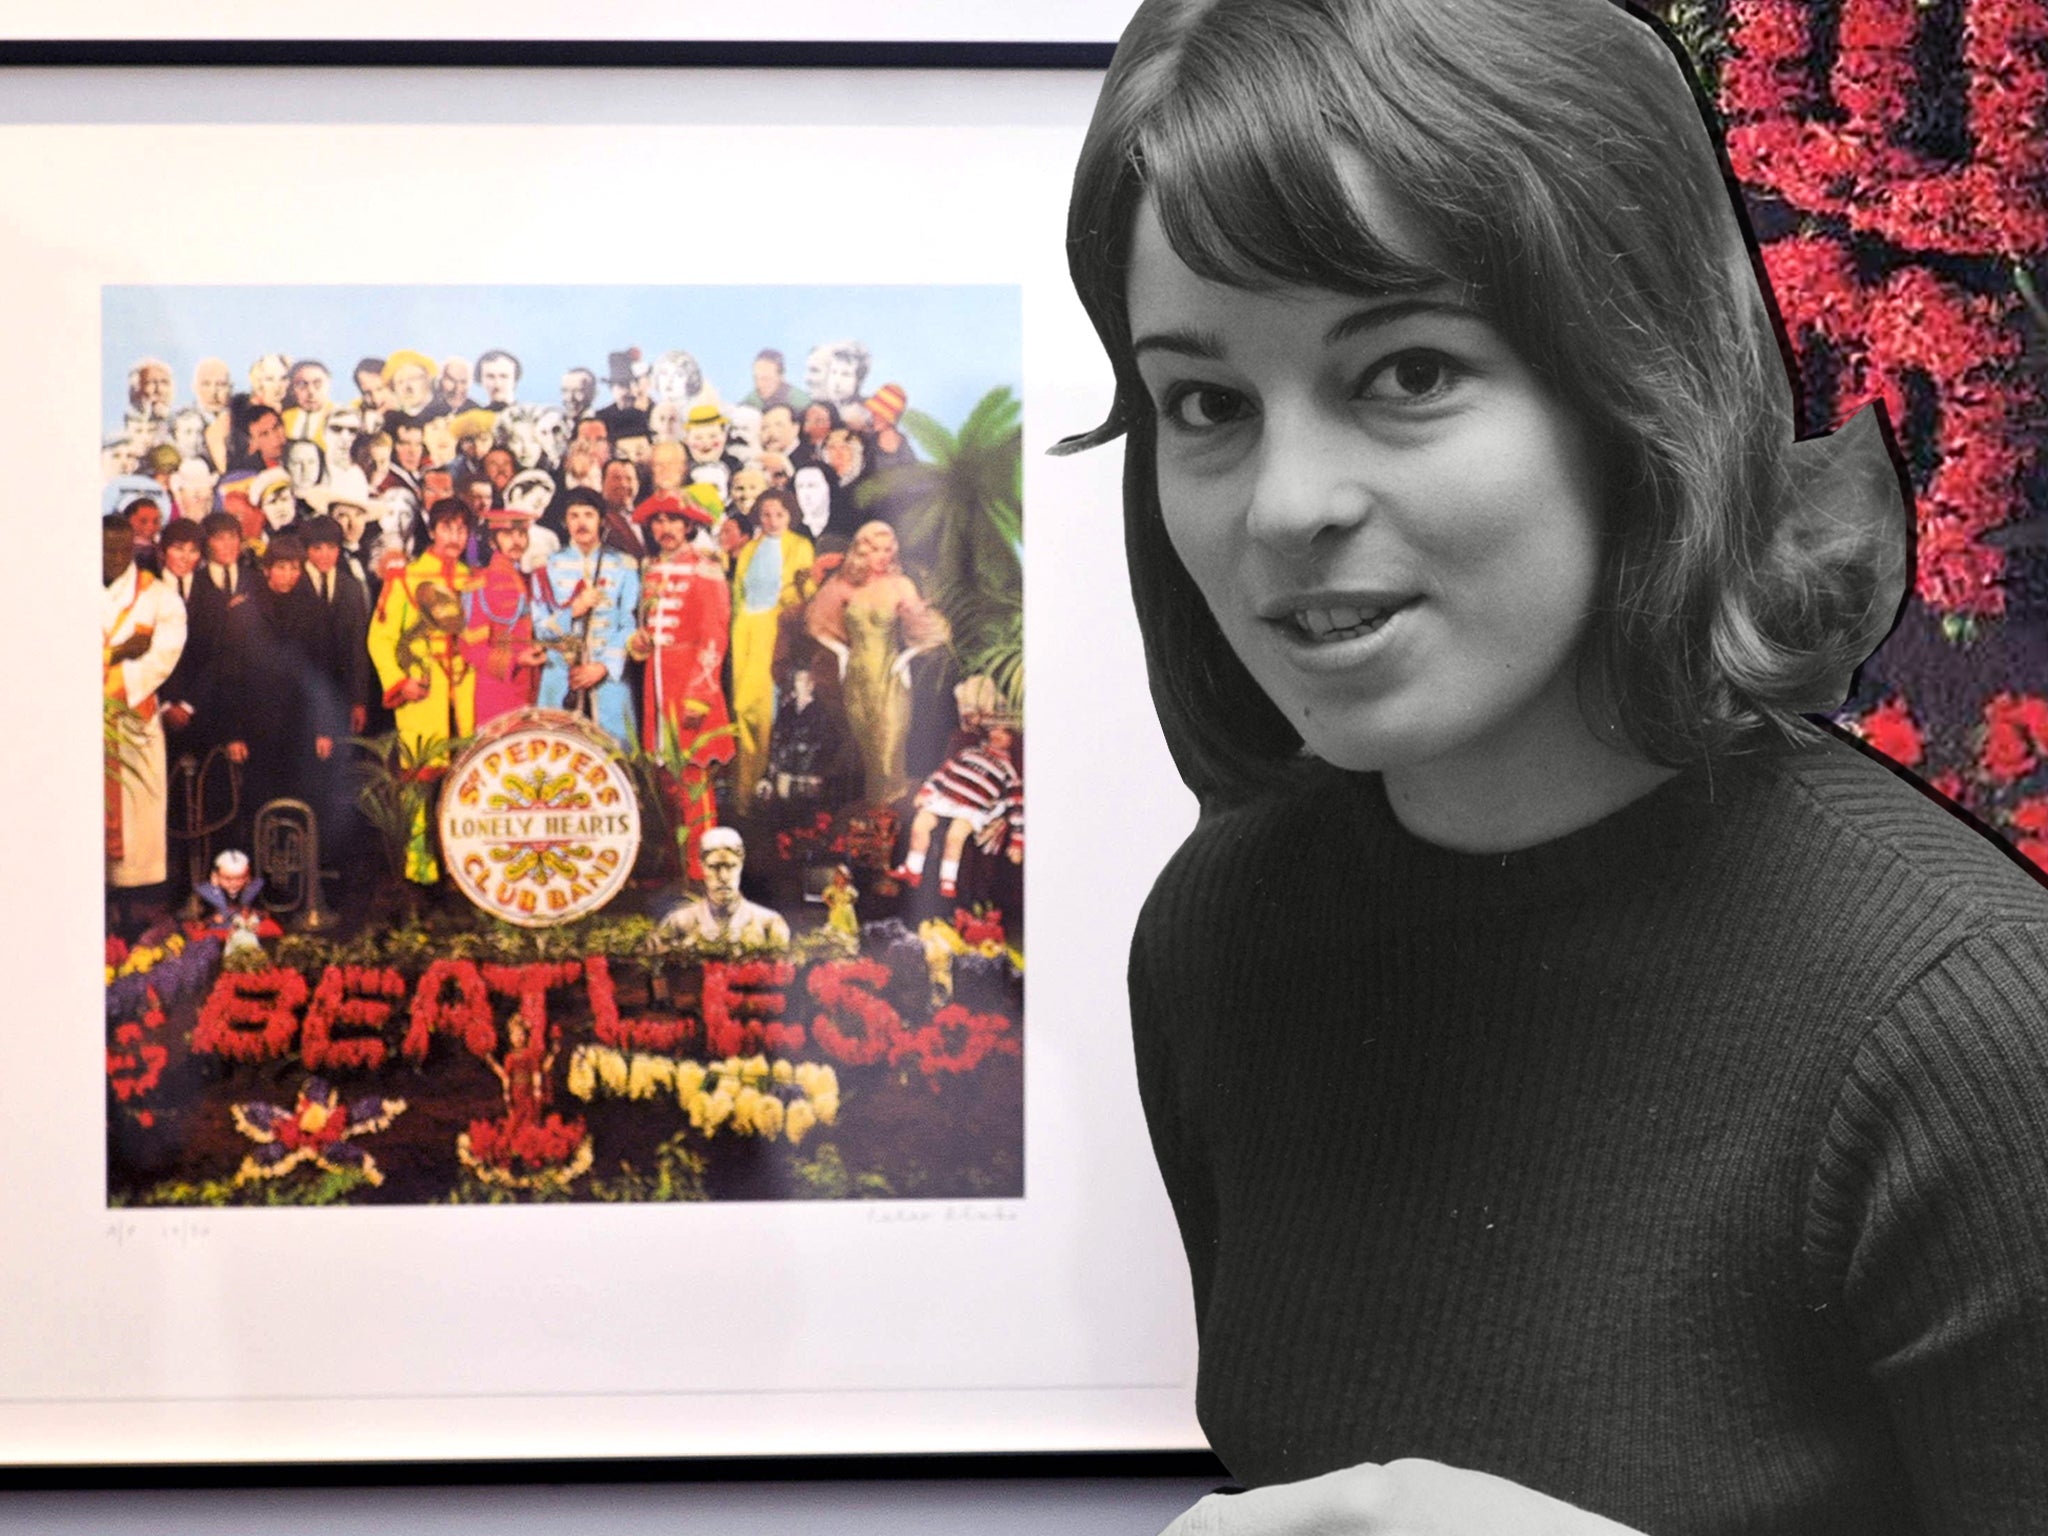 The American artist created the 1967 album cover with her then husband Peter Blake